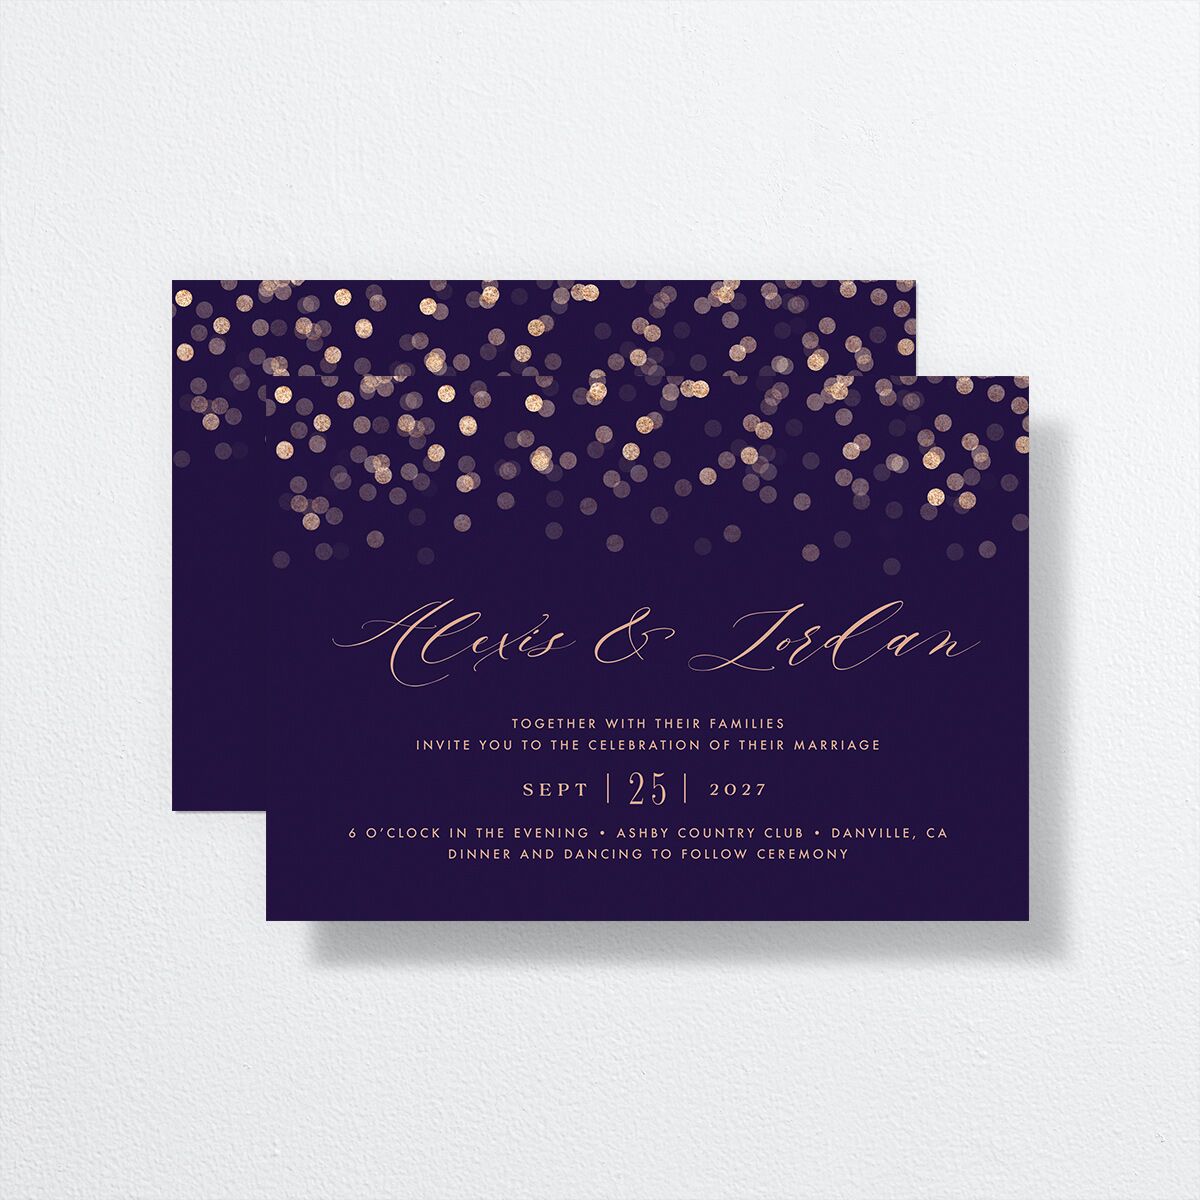 Elegant Glow Wedding Invitations front-and-back in purple